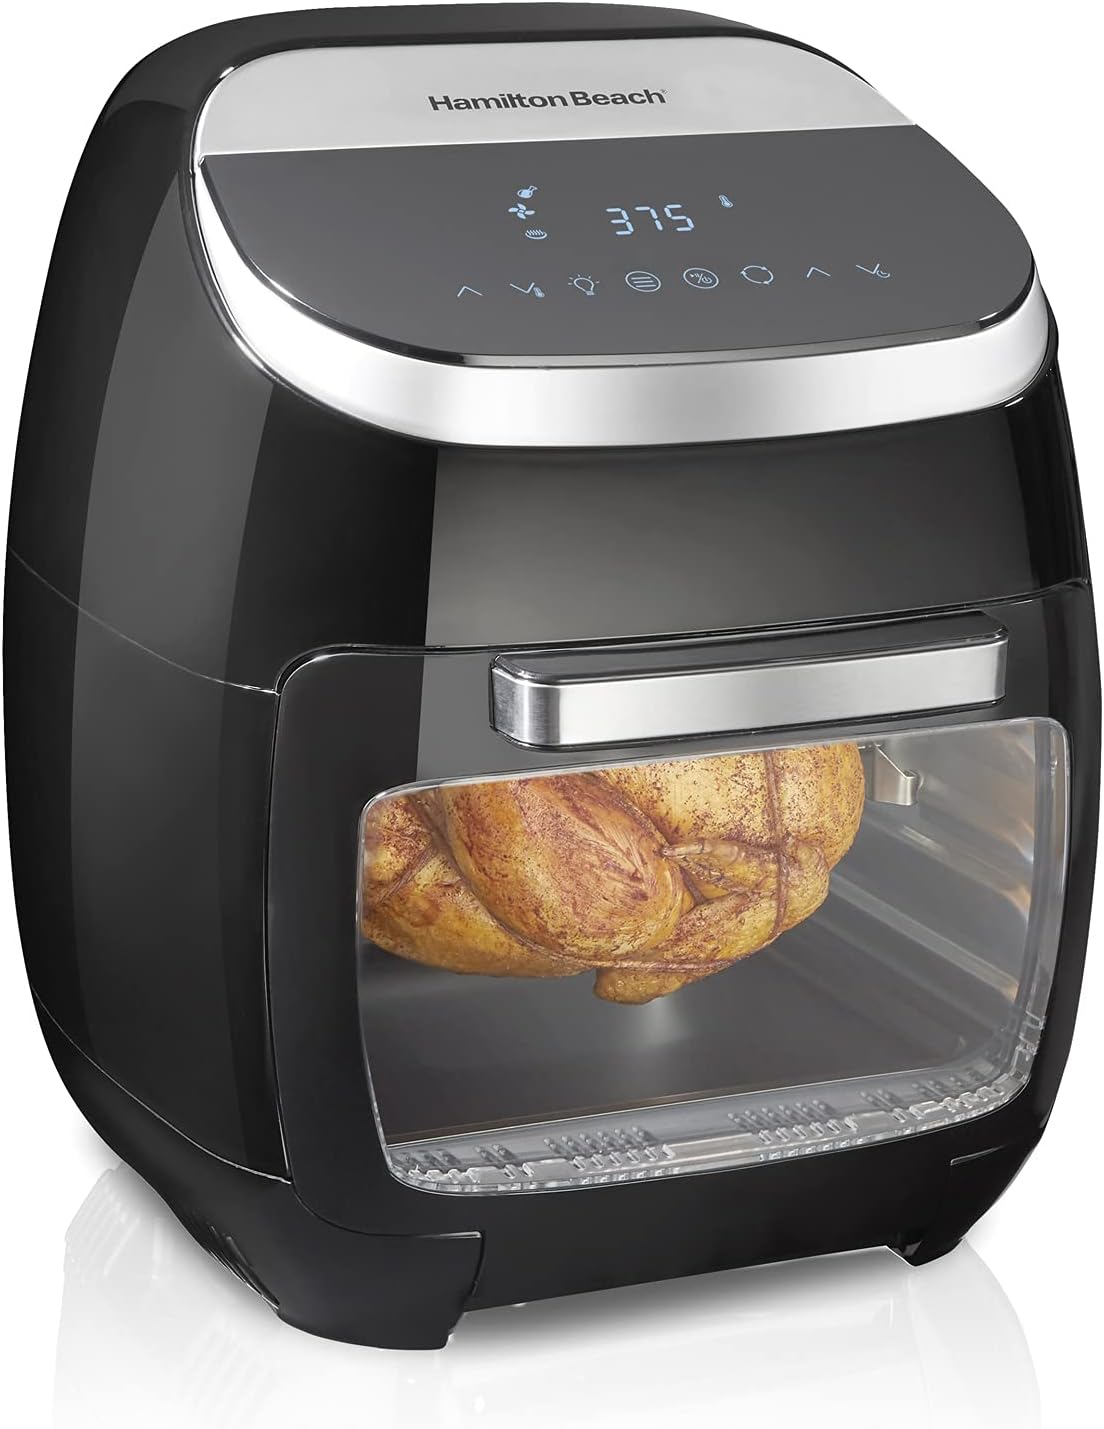 Hamilton Beach 11.6 QT Digital Air Fryer Oven with Rotisserie and Rotating Basket